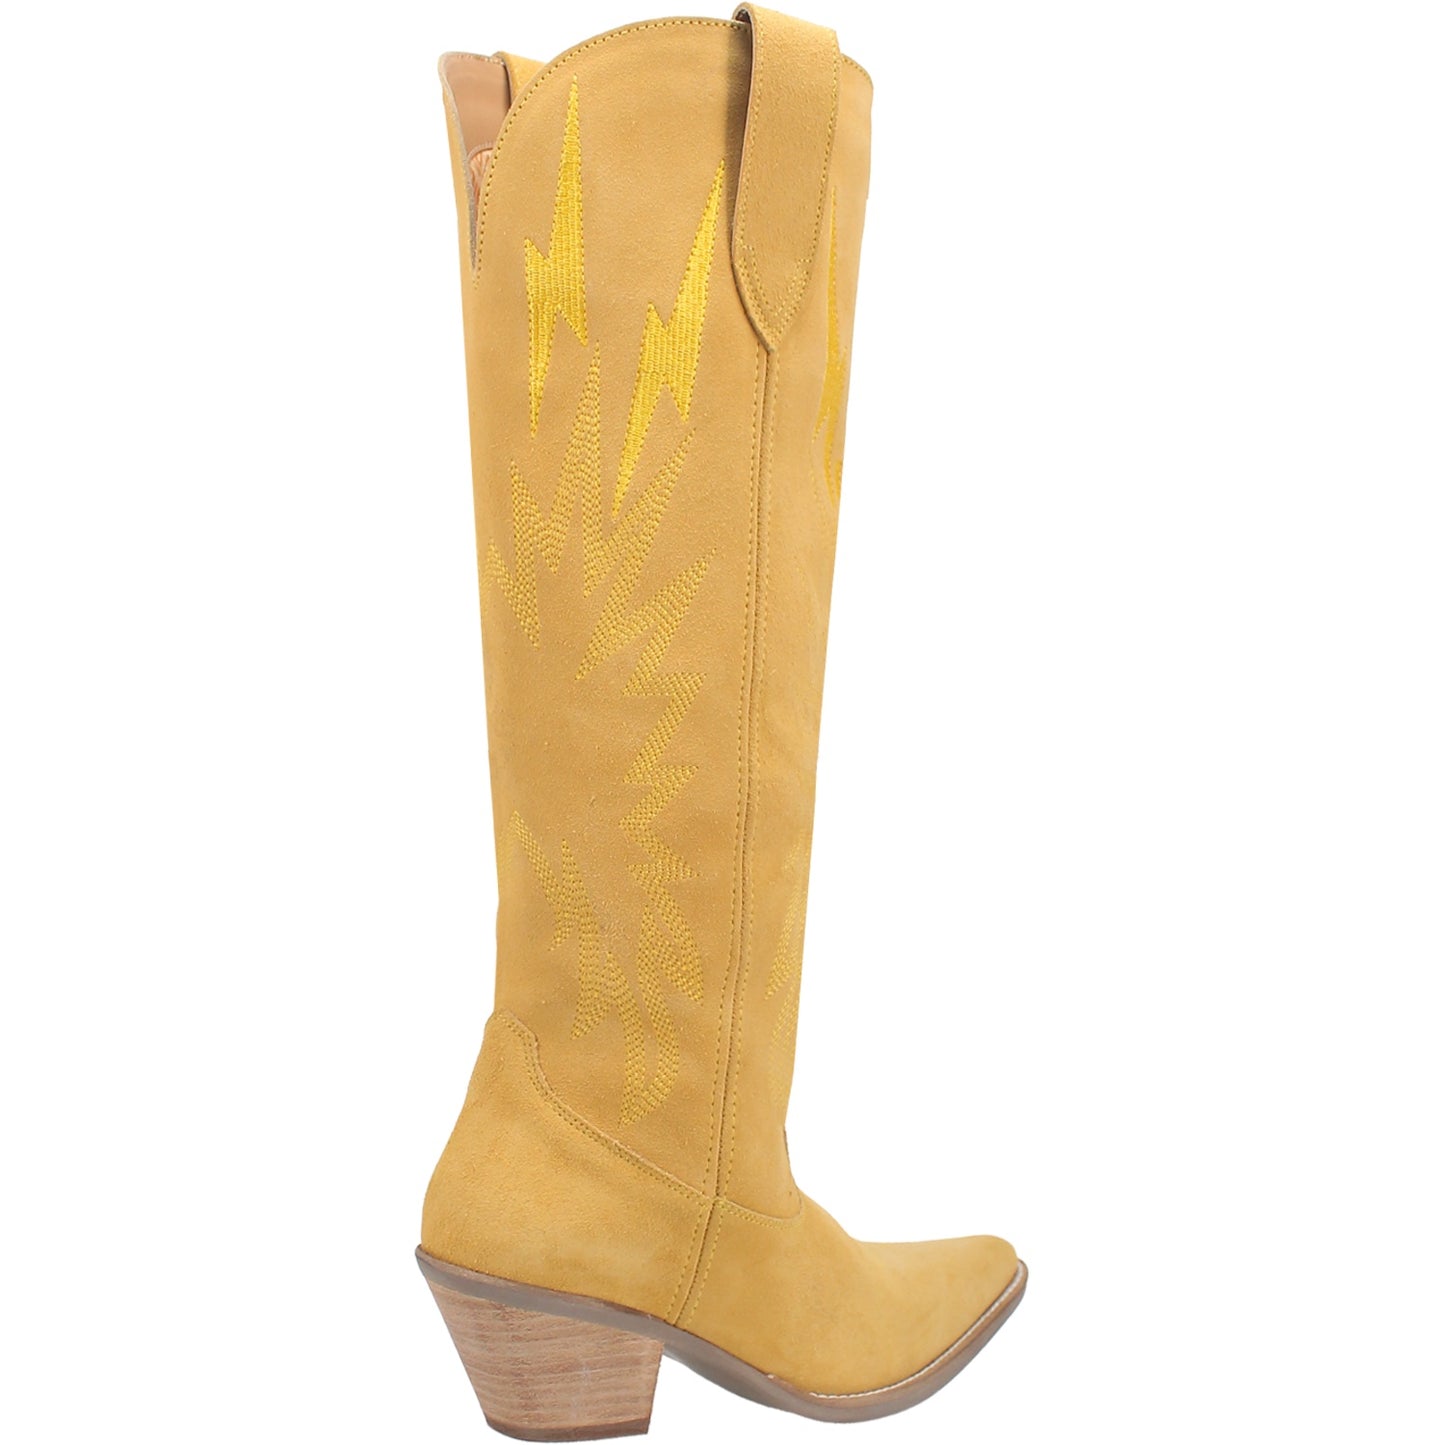 THUNDER ROAD YELLOW BOOTS